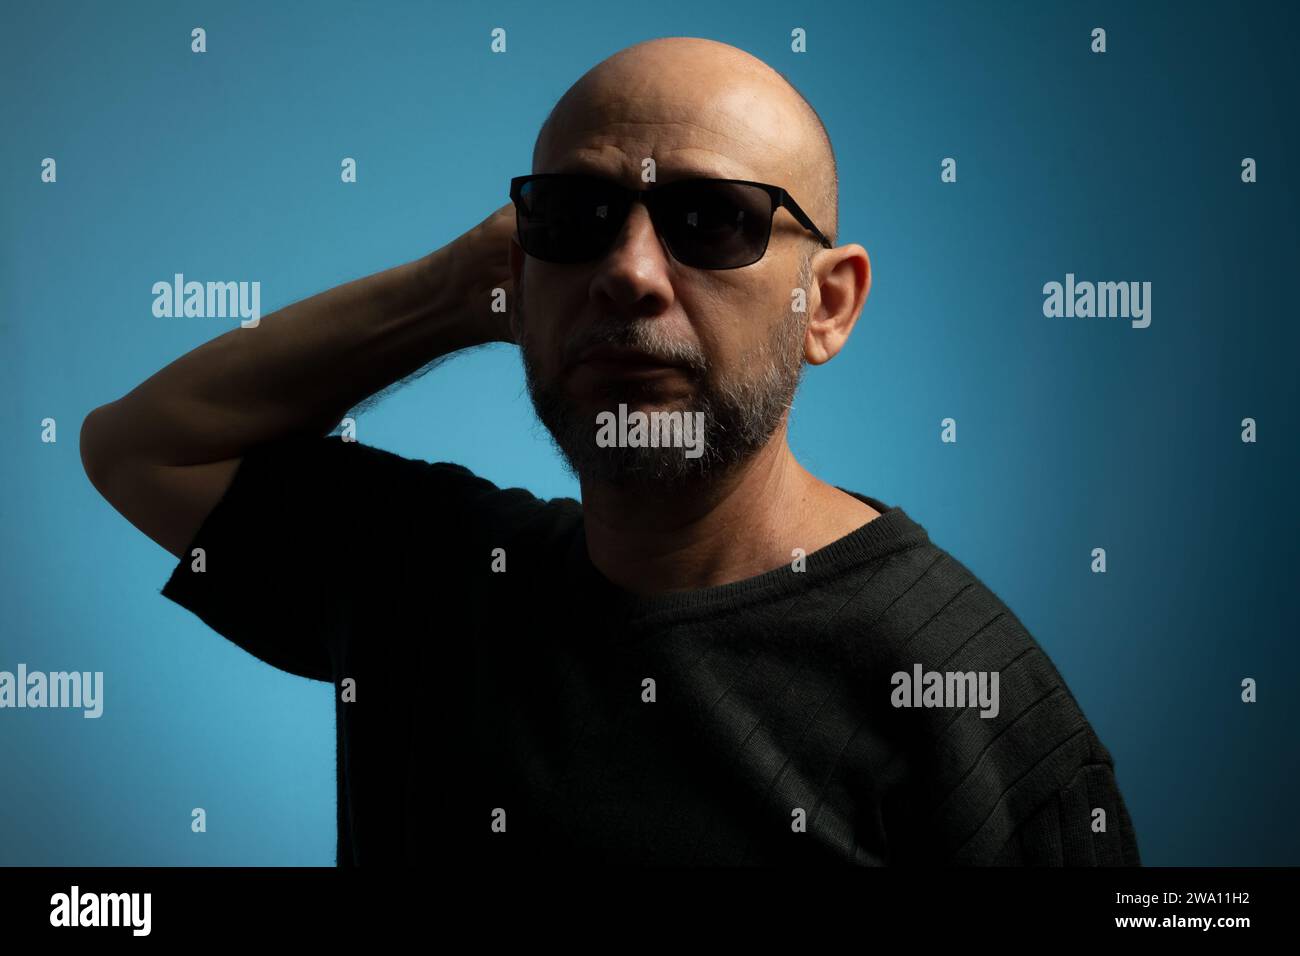 Portrait of bald and bearded mature man wearing sunglasses looking towards the camera. Isolated on blue background. Stock Photo